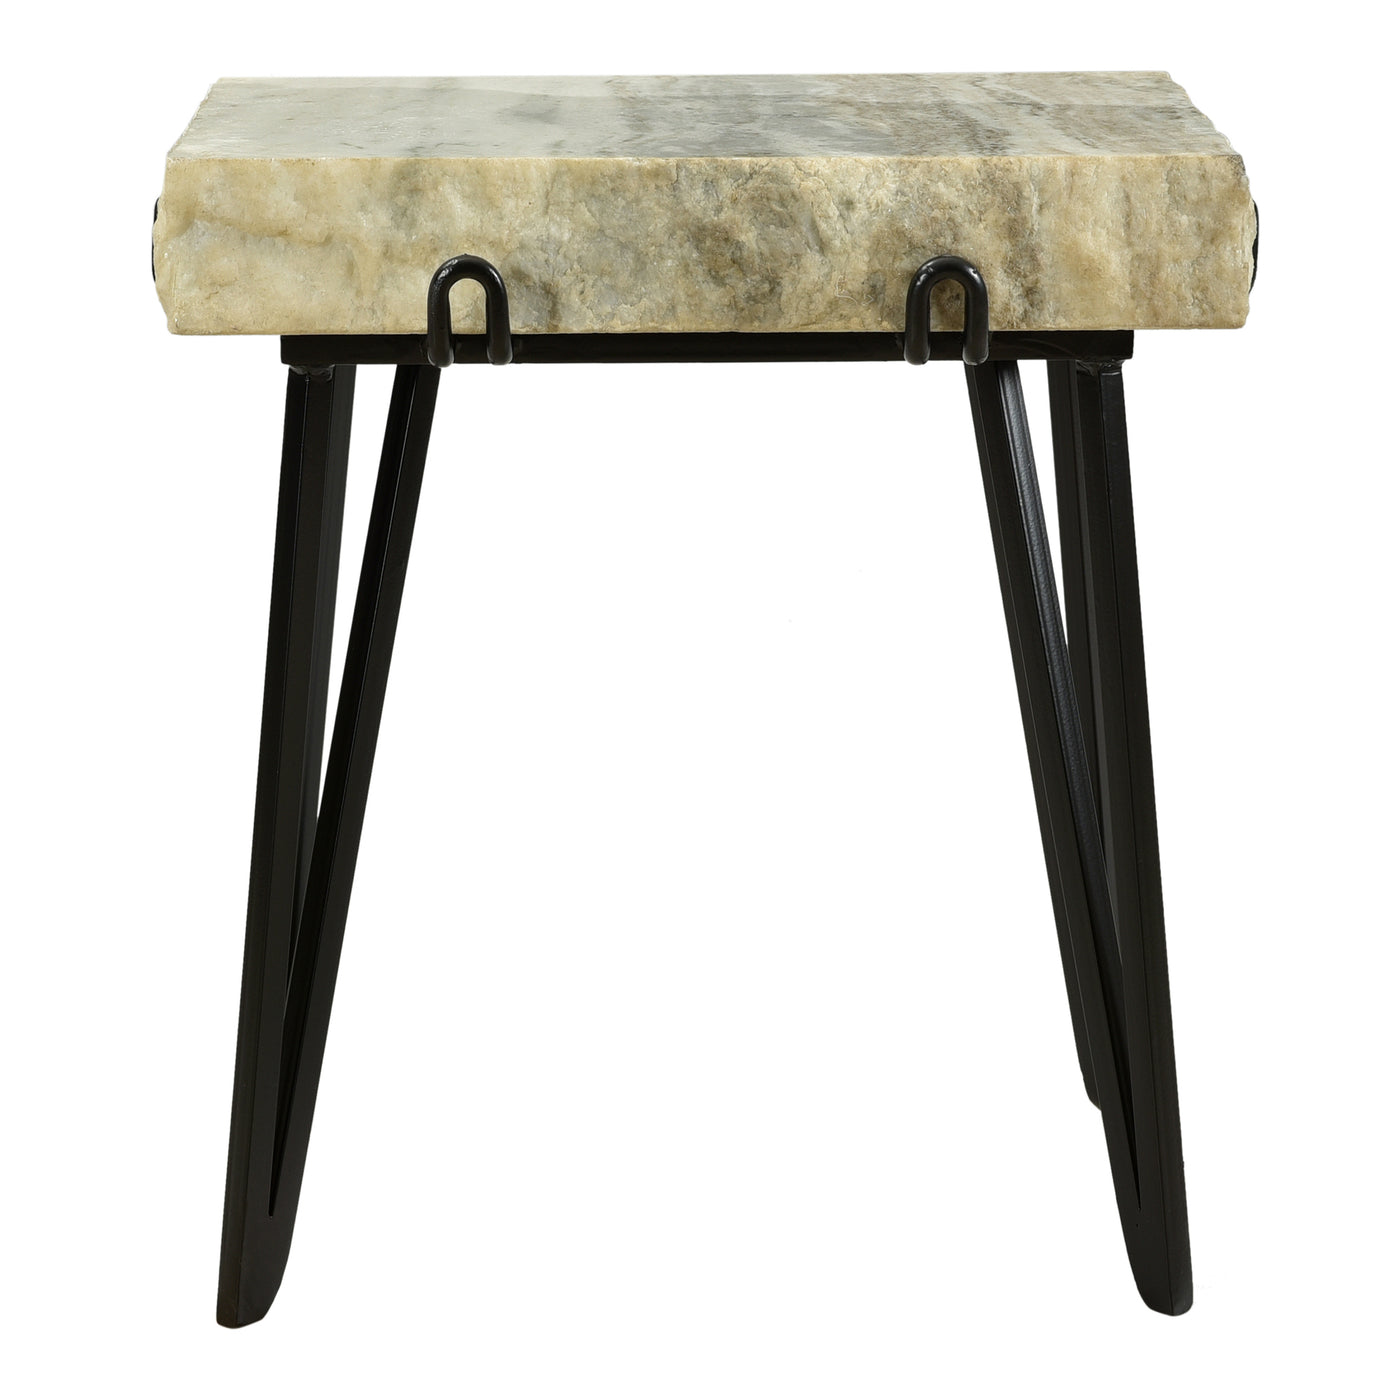 The Alpert accent table is anything but meek. Exposing the rough texture of its natural marble stone celebrates its raw be...